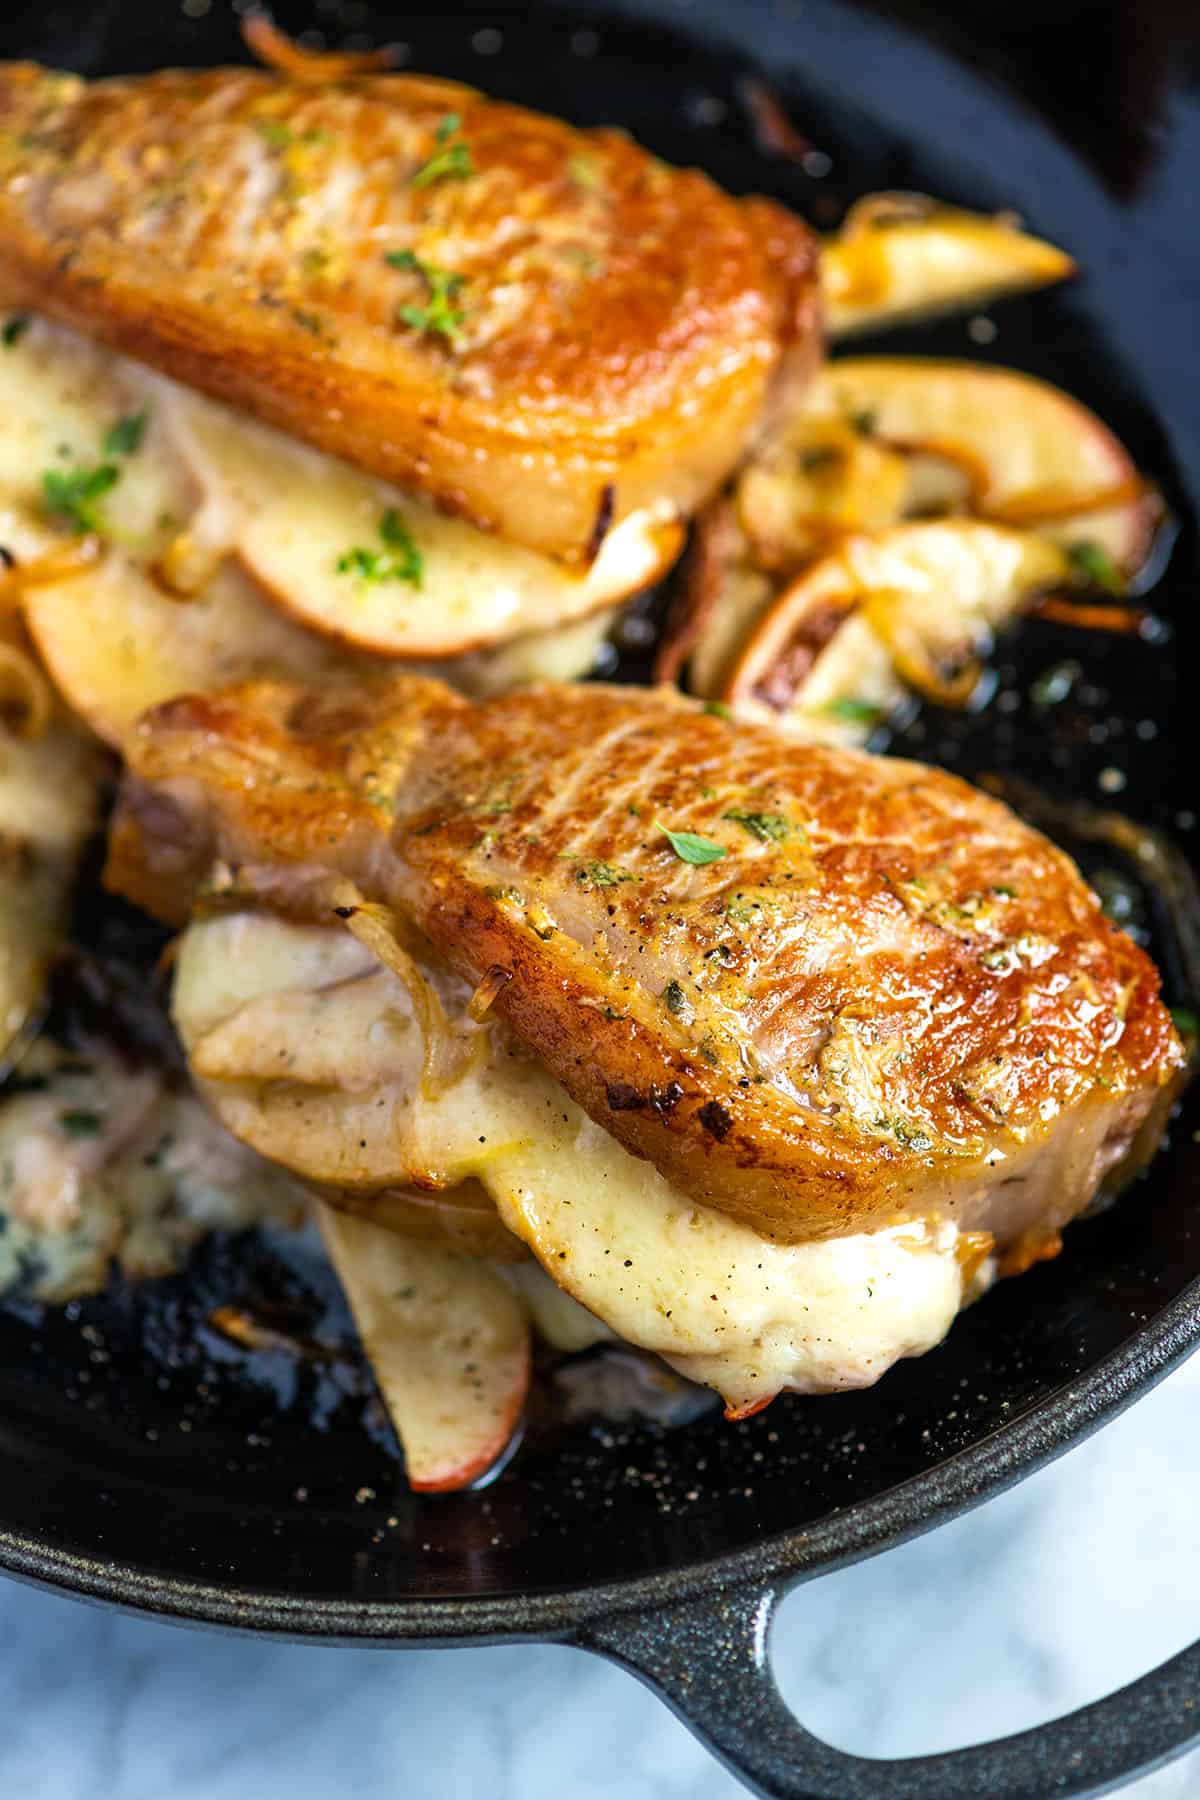 Apple Stuffed Pork Chops with Onions and Cheese